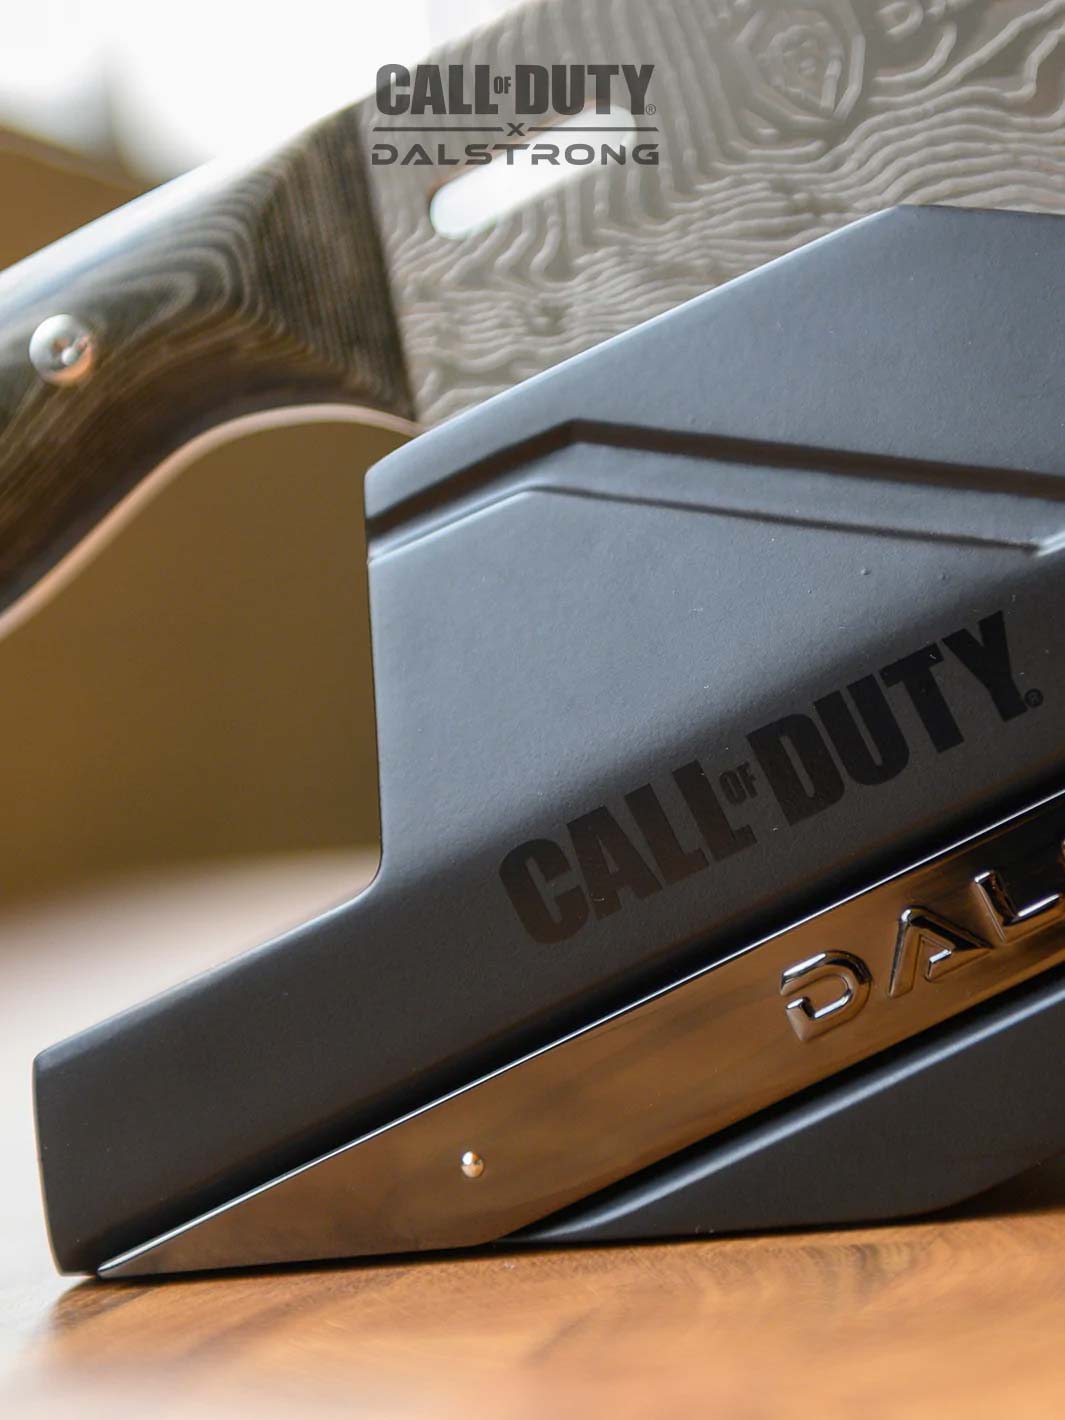 Cleaver Knife with Stand | Obliterator | Call of Duty © Edition | EXCLUSIVE COLLECTOR SET | Dalstrong ©